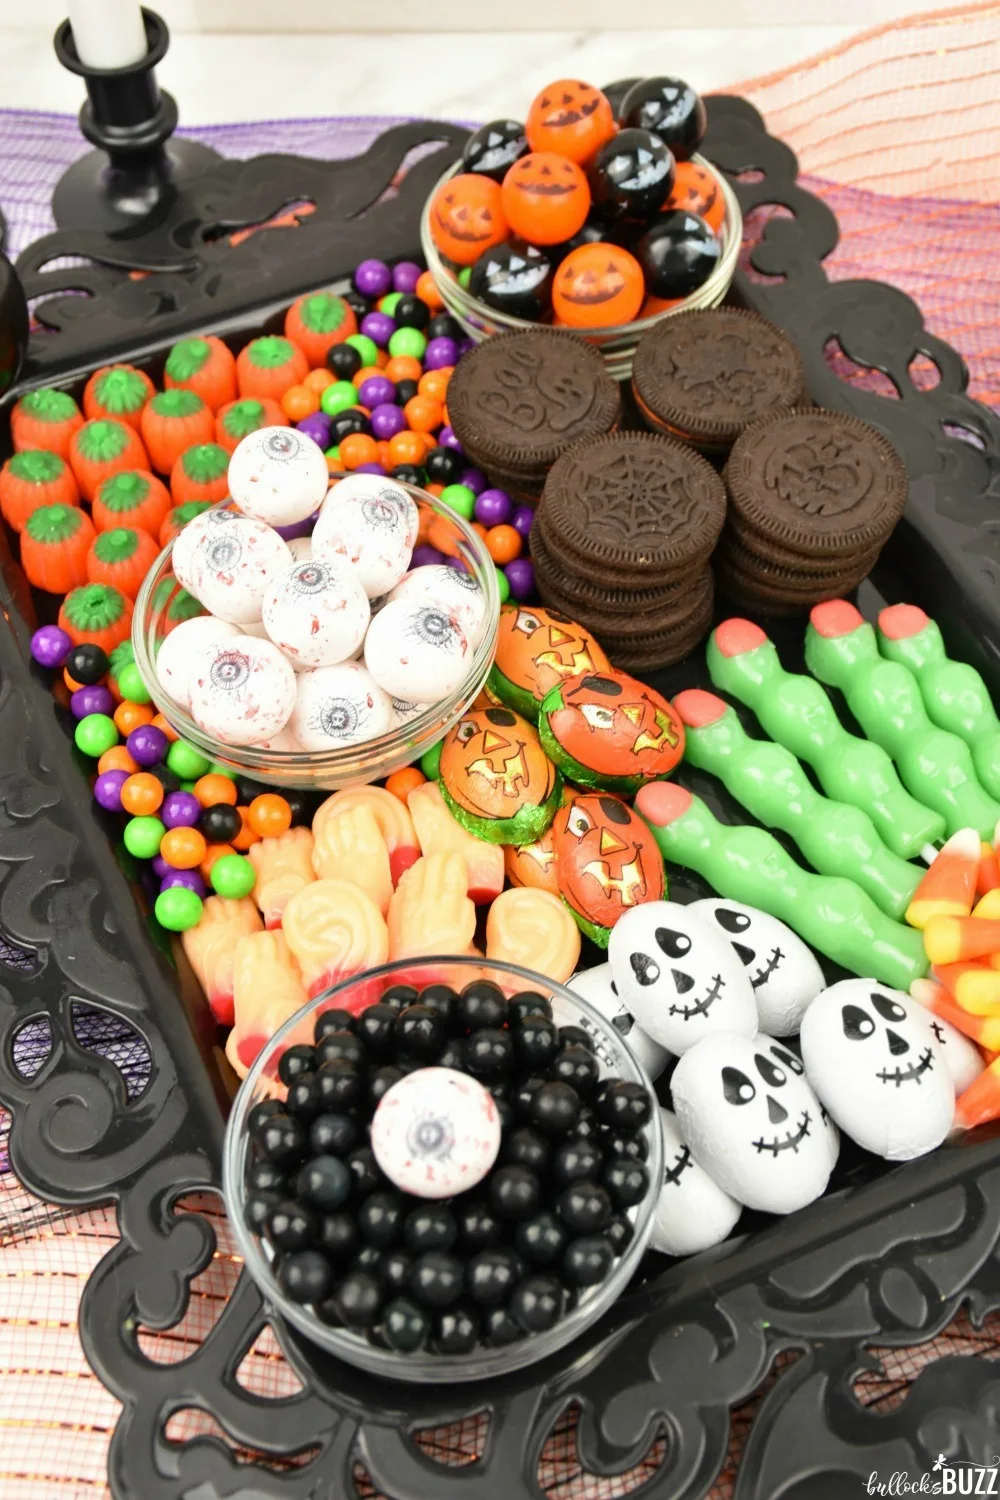 Filled with traditional Halloween candies, this frightfully sweet Halloween Candy Charcuterie Board has it all!